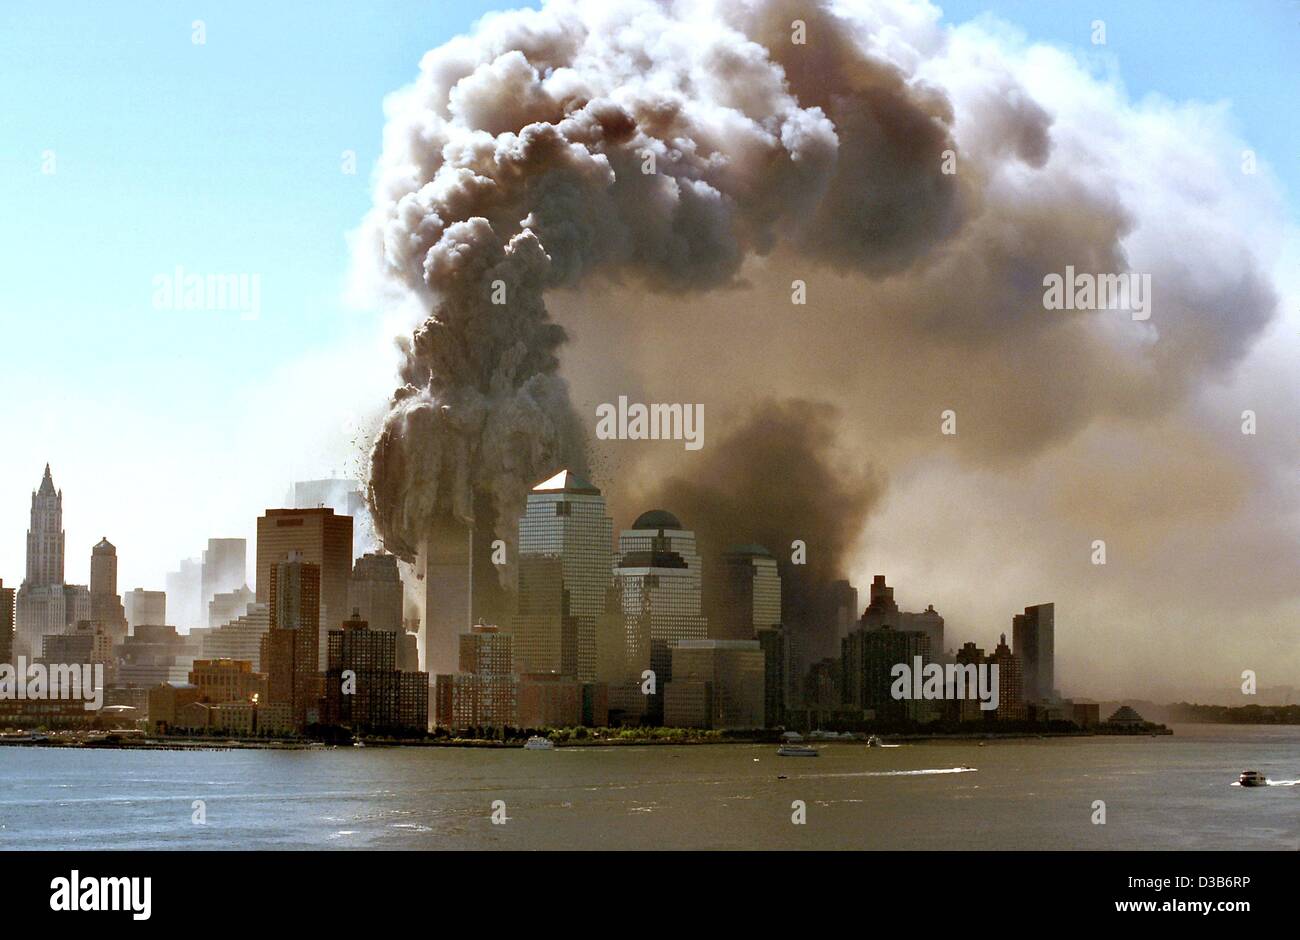 (dpa) - Clouds of smoke rise over Manhattan as the twin towers of the World Trade Center in New York collapse, 11 September 2001. 2,823 people were killed when Islamic terrorists crashed into the WTC with highjacked planes. Together with 189 dead in the Pentagon attack of plane no. 3 and the 44 on b Stock Photo